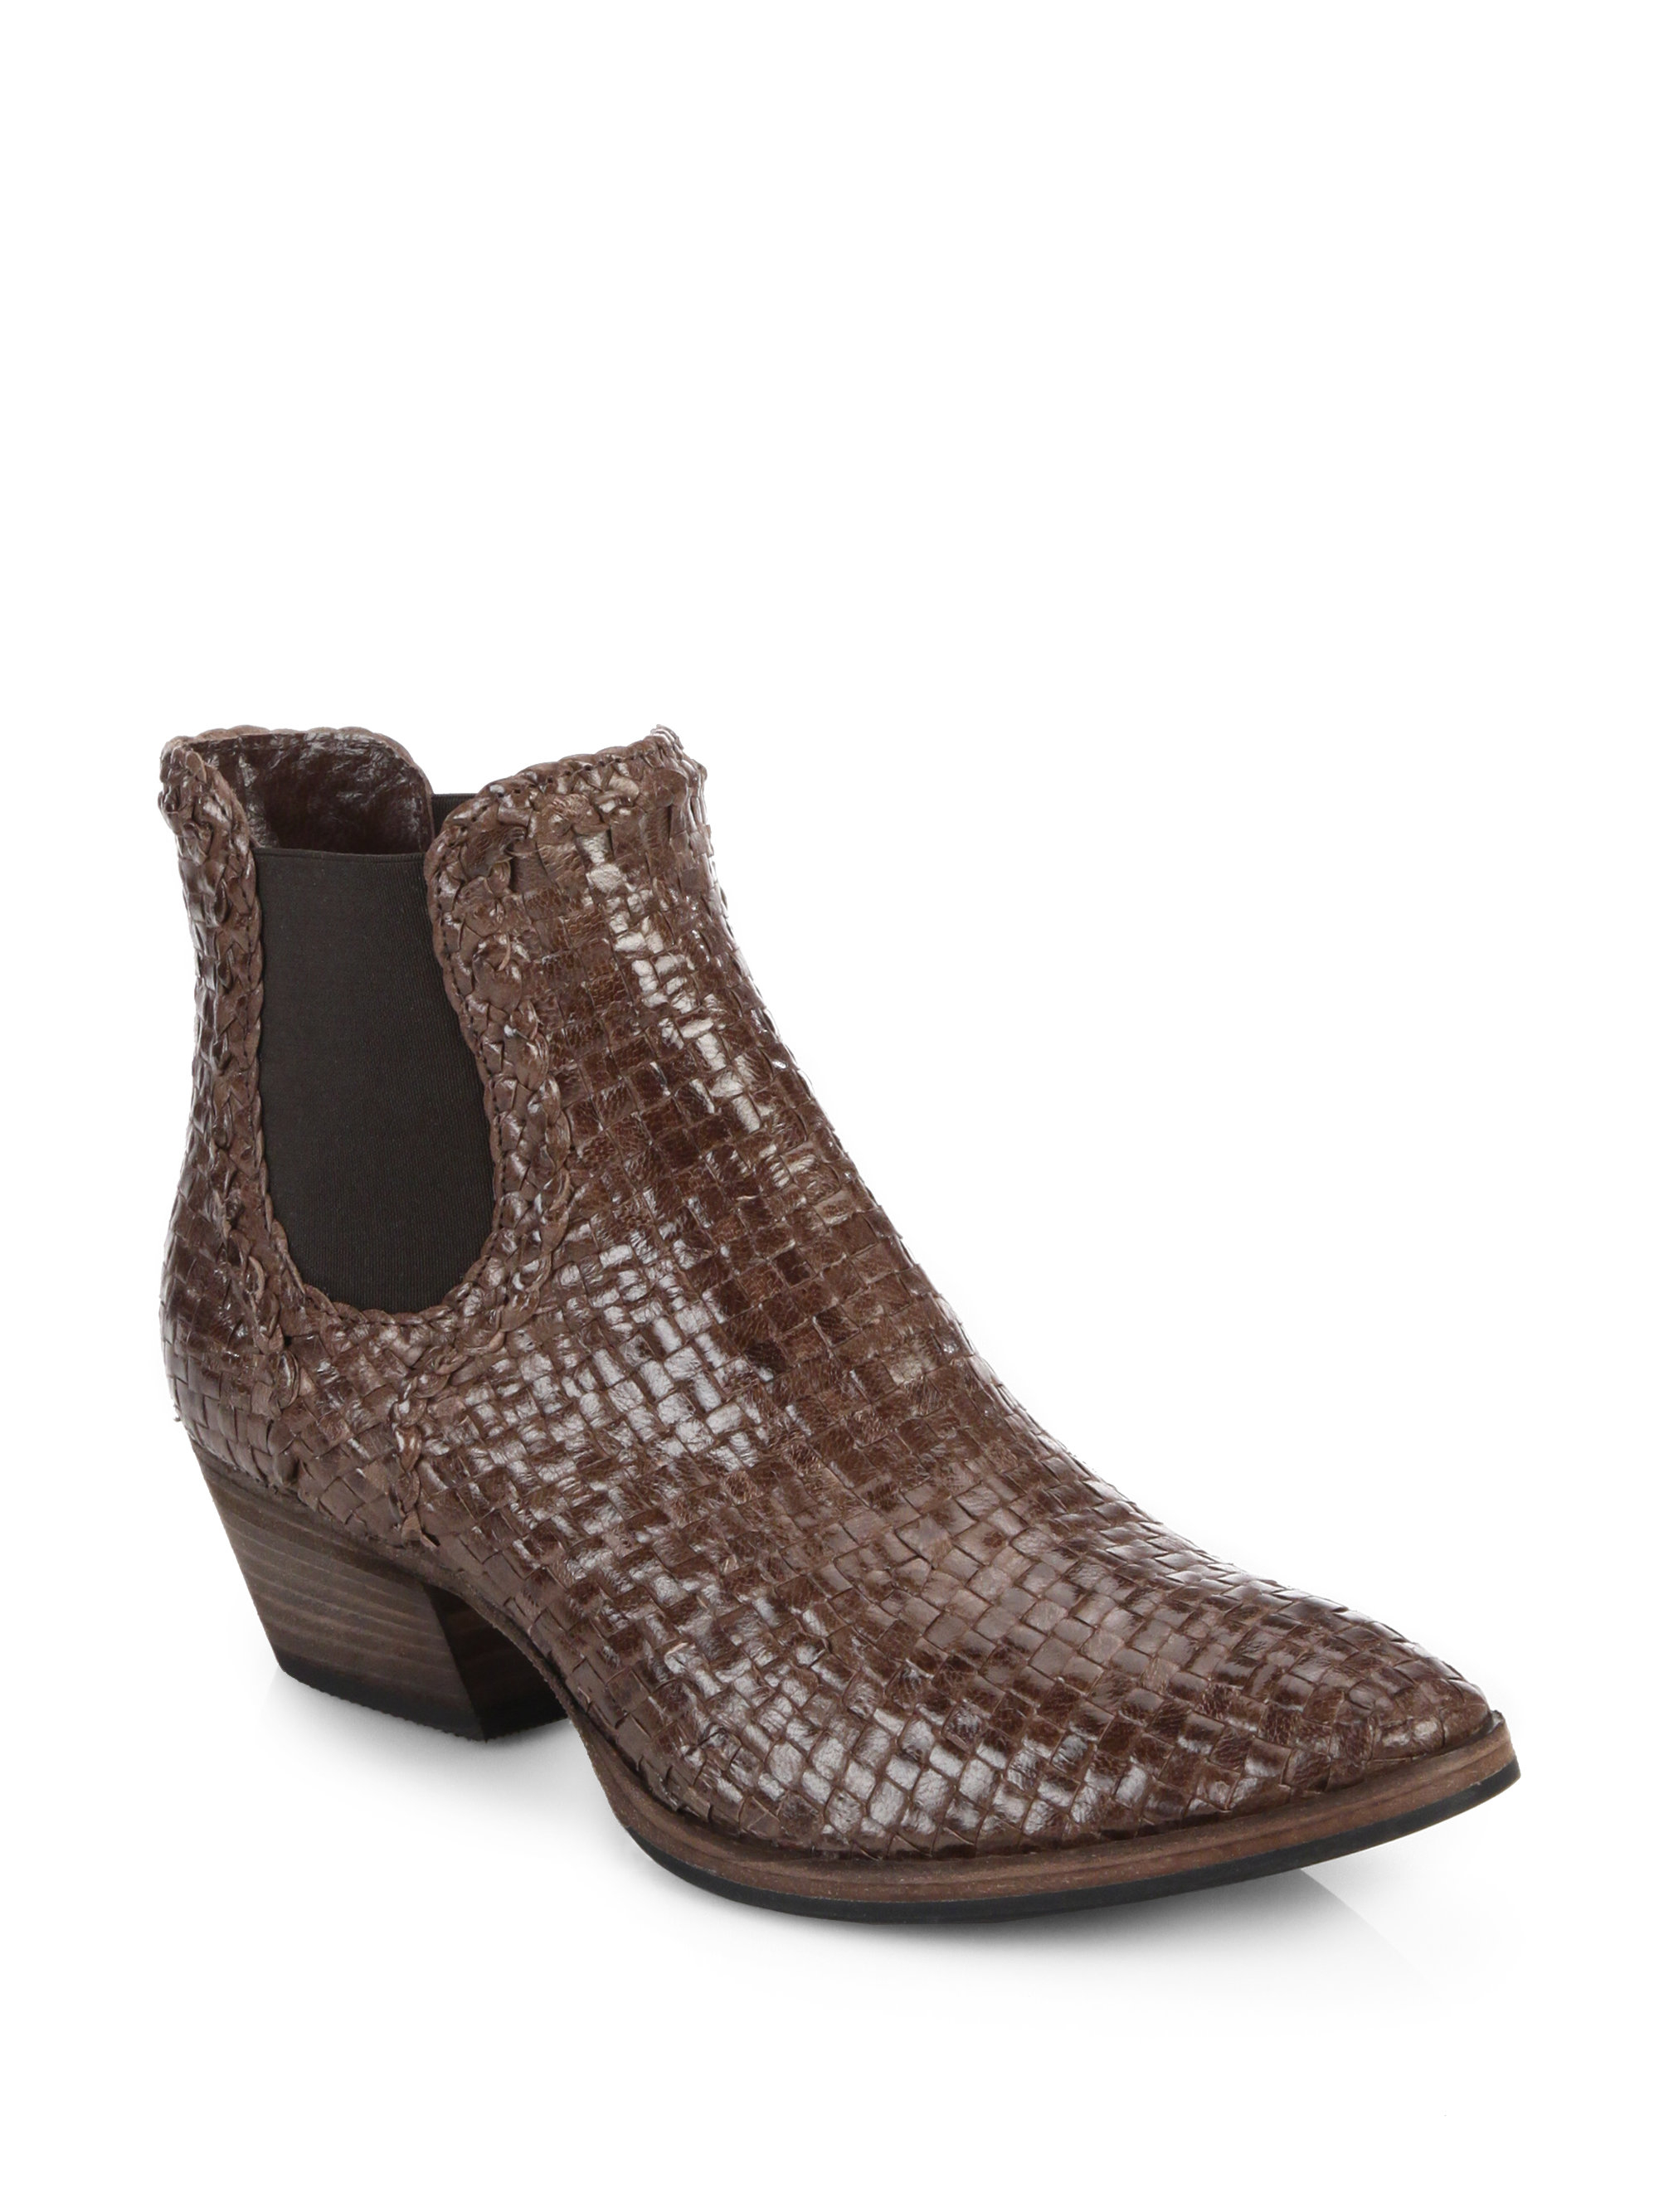 Aquatalia Desire Woven Leather Boots in Brown | Lyst